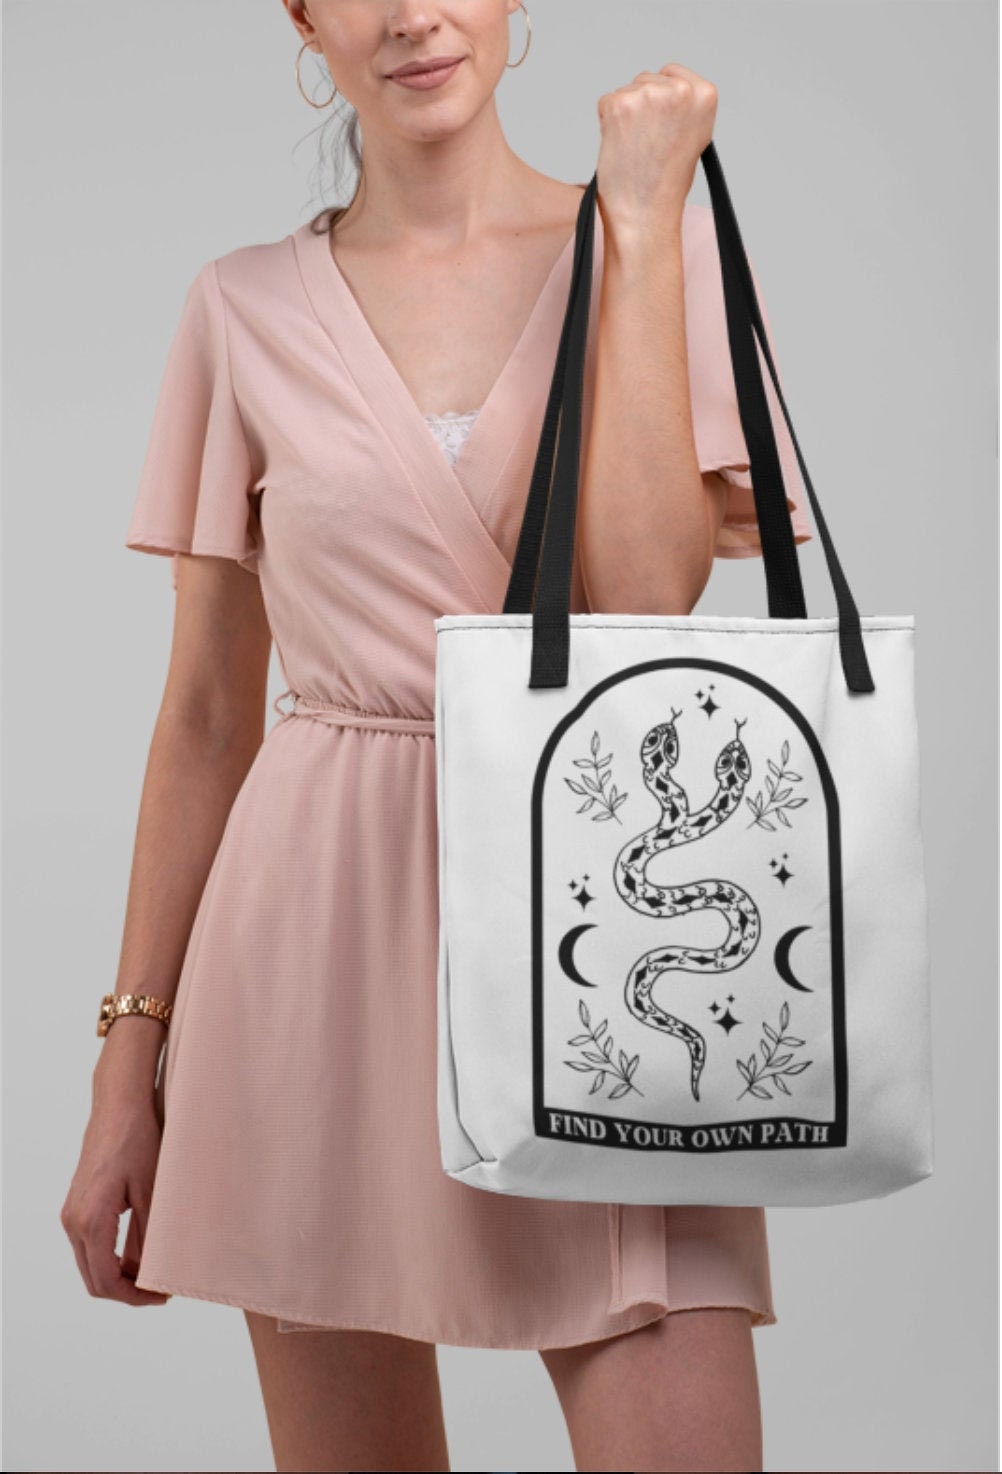 Mystical Tree Of Life canvas tote bag gothic Women Spiritual Witchcraft  shopping bags